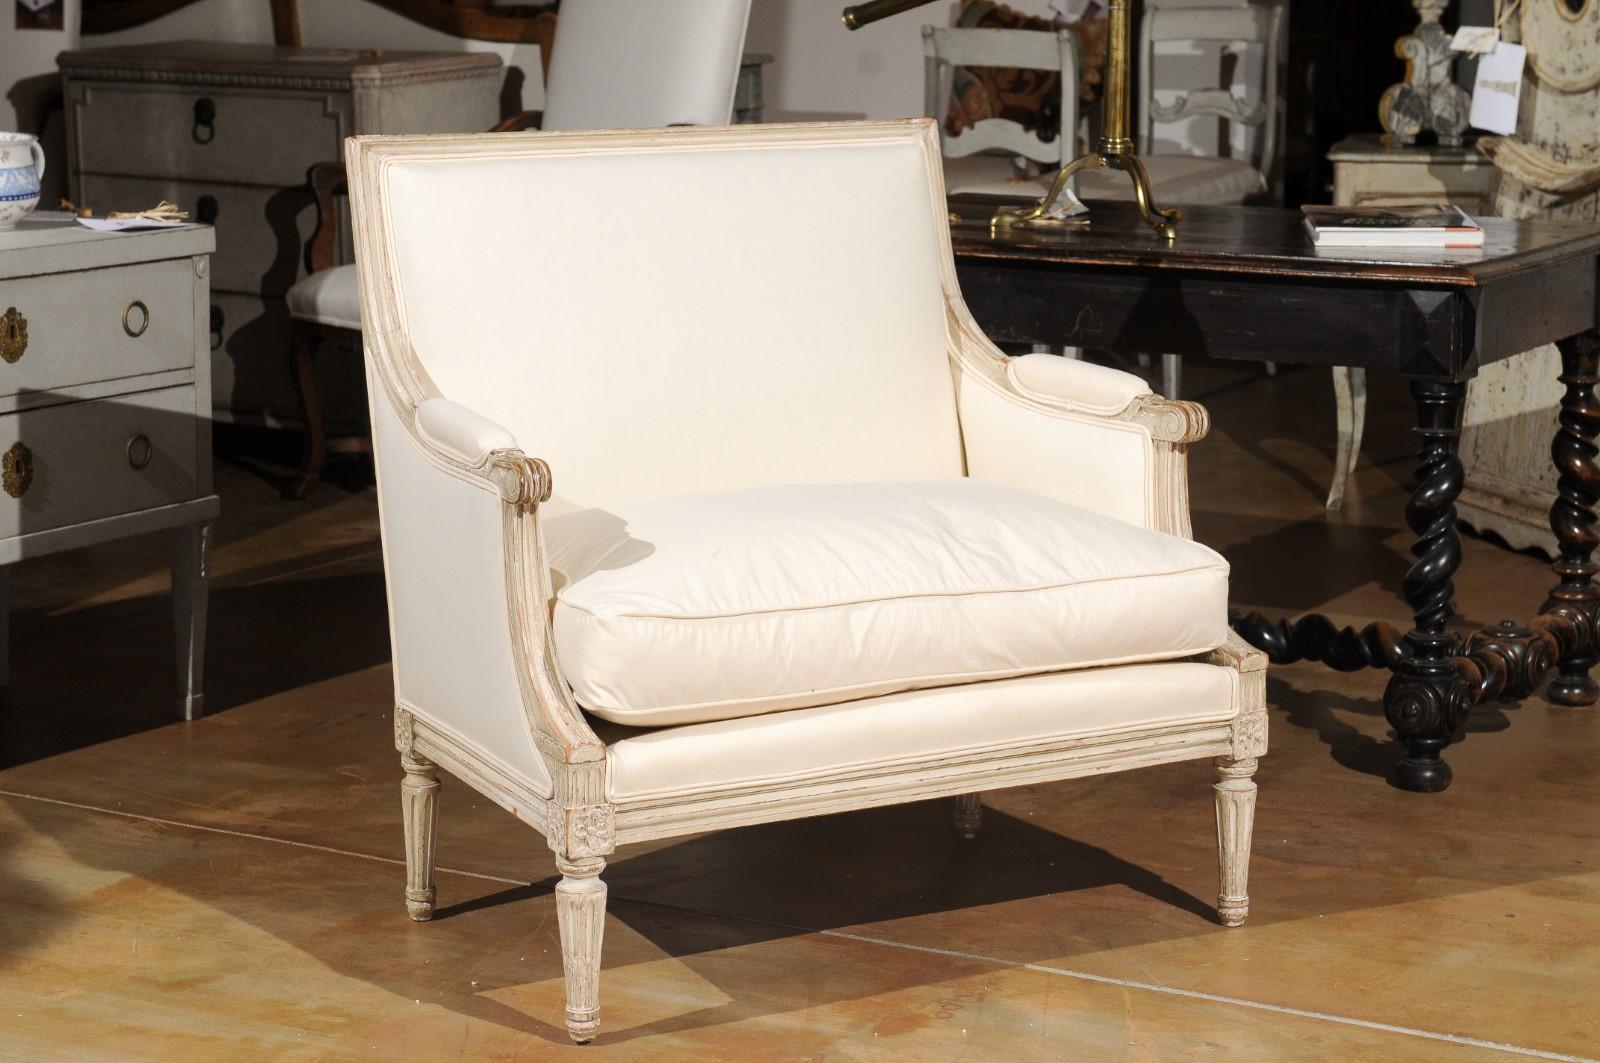 A French Louis XVI style painted wood Marquise chair from the 19th century, with carved rosettes, fluted legs and newer upholstery. Created in France during the 19th century, this Louis XVI style Marquise (meaning wider than a typical bergère)